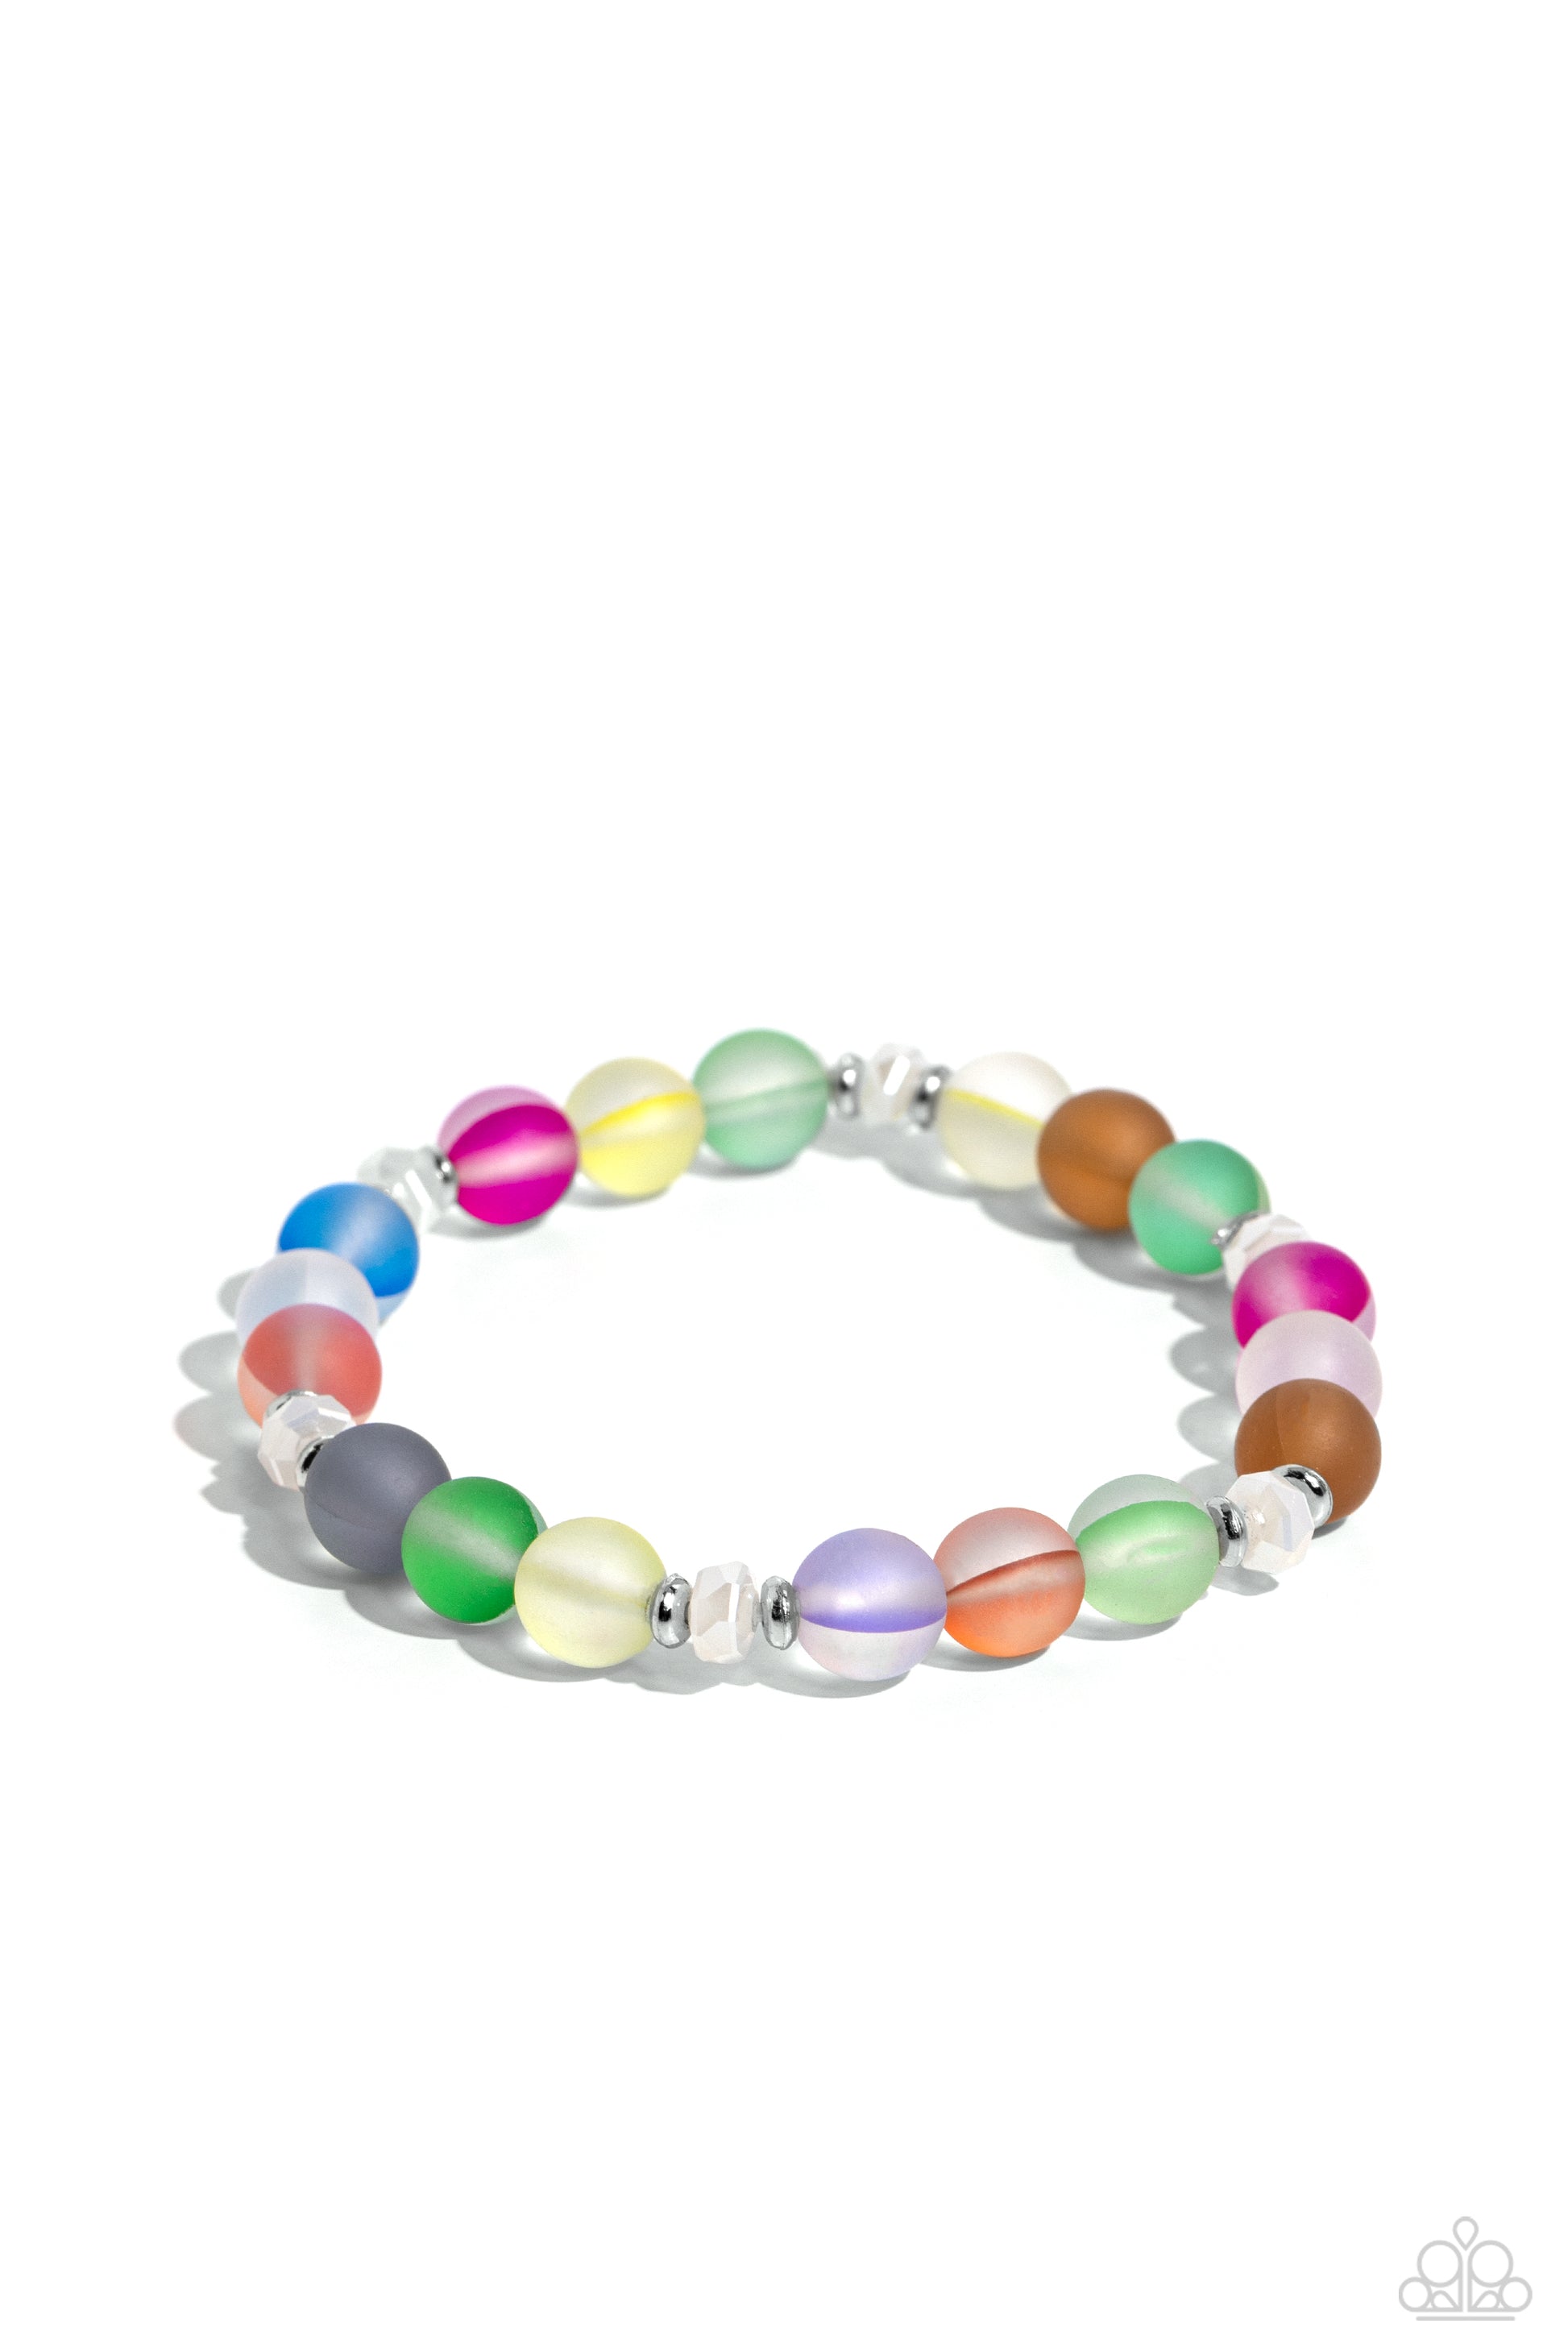 Mermaid Mirage Multi Stretch Bracelet - Paparazzi Accessories  Infused with silver accents and faceted white beads, a dreamy collection of frosted glassy multicolored beads is threaded along a stretchy band around the wrist for an enchanting glow.  Sold as one individual bracelet.  P9SE-URMT-274XX